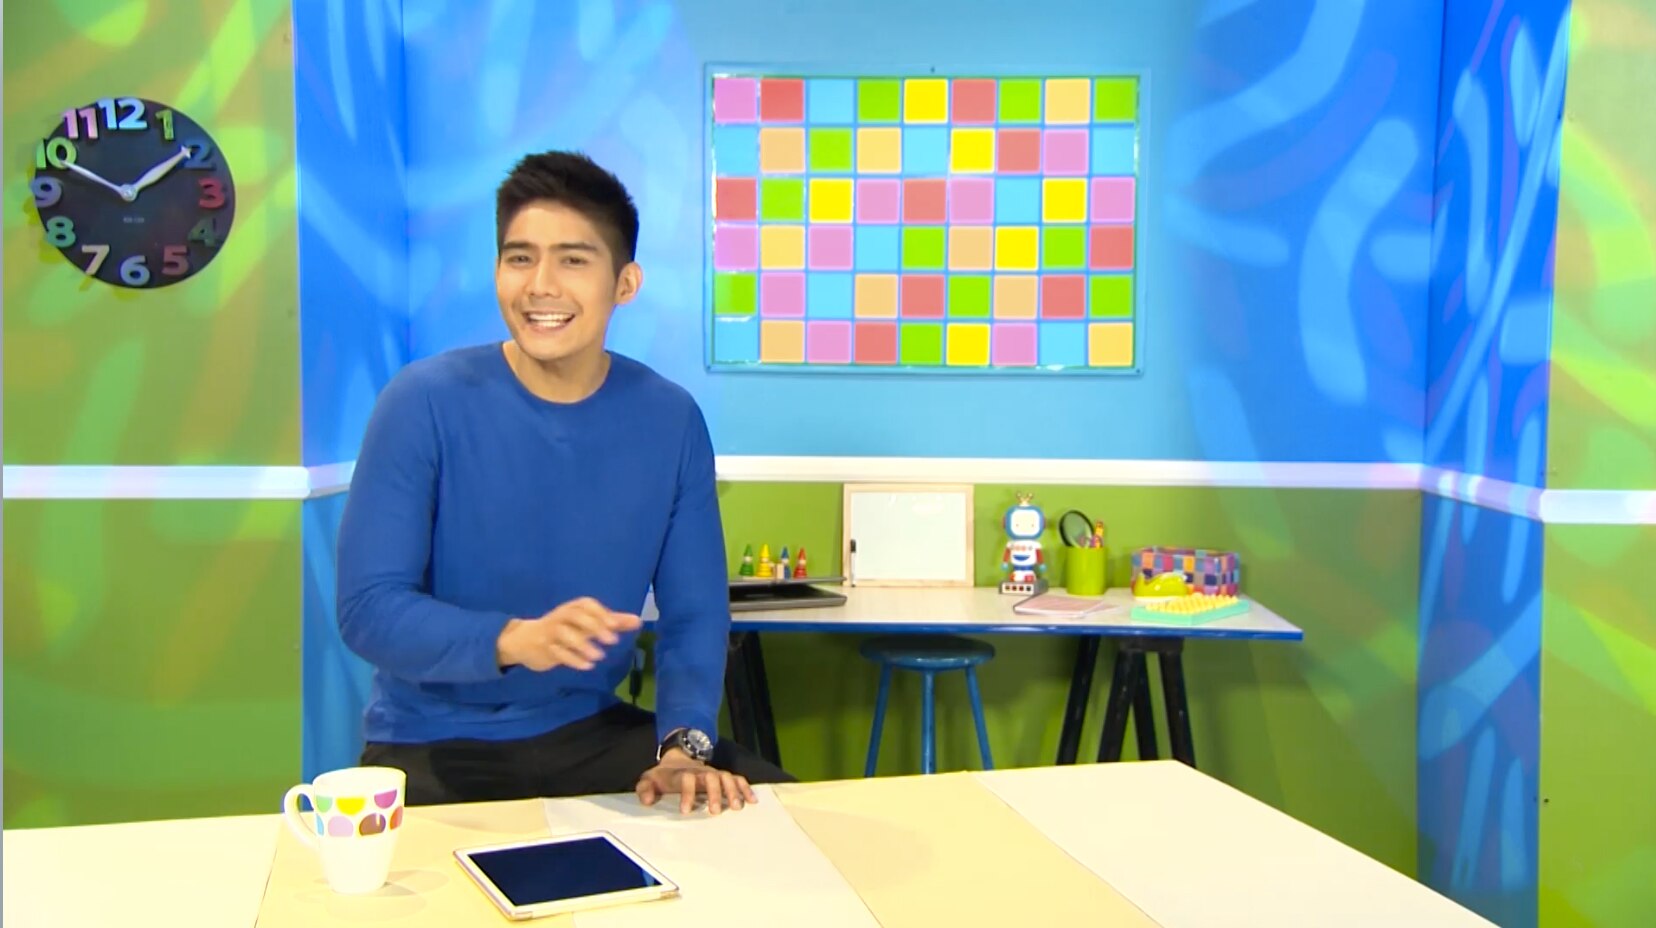 Hosted by Robi Domingo, MathDali teaches mathematics using real life situations